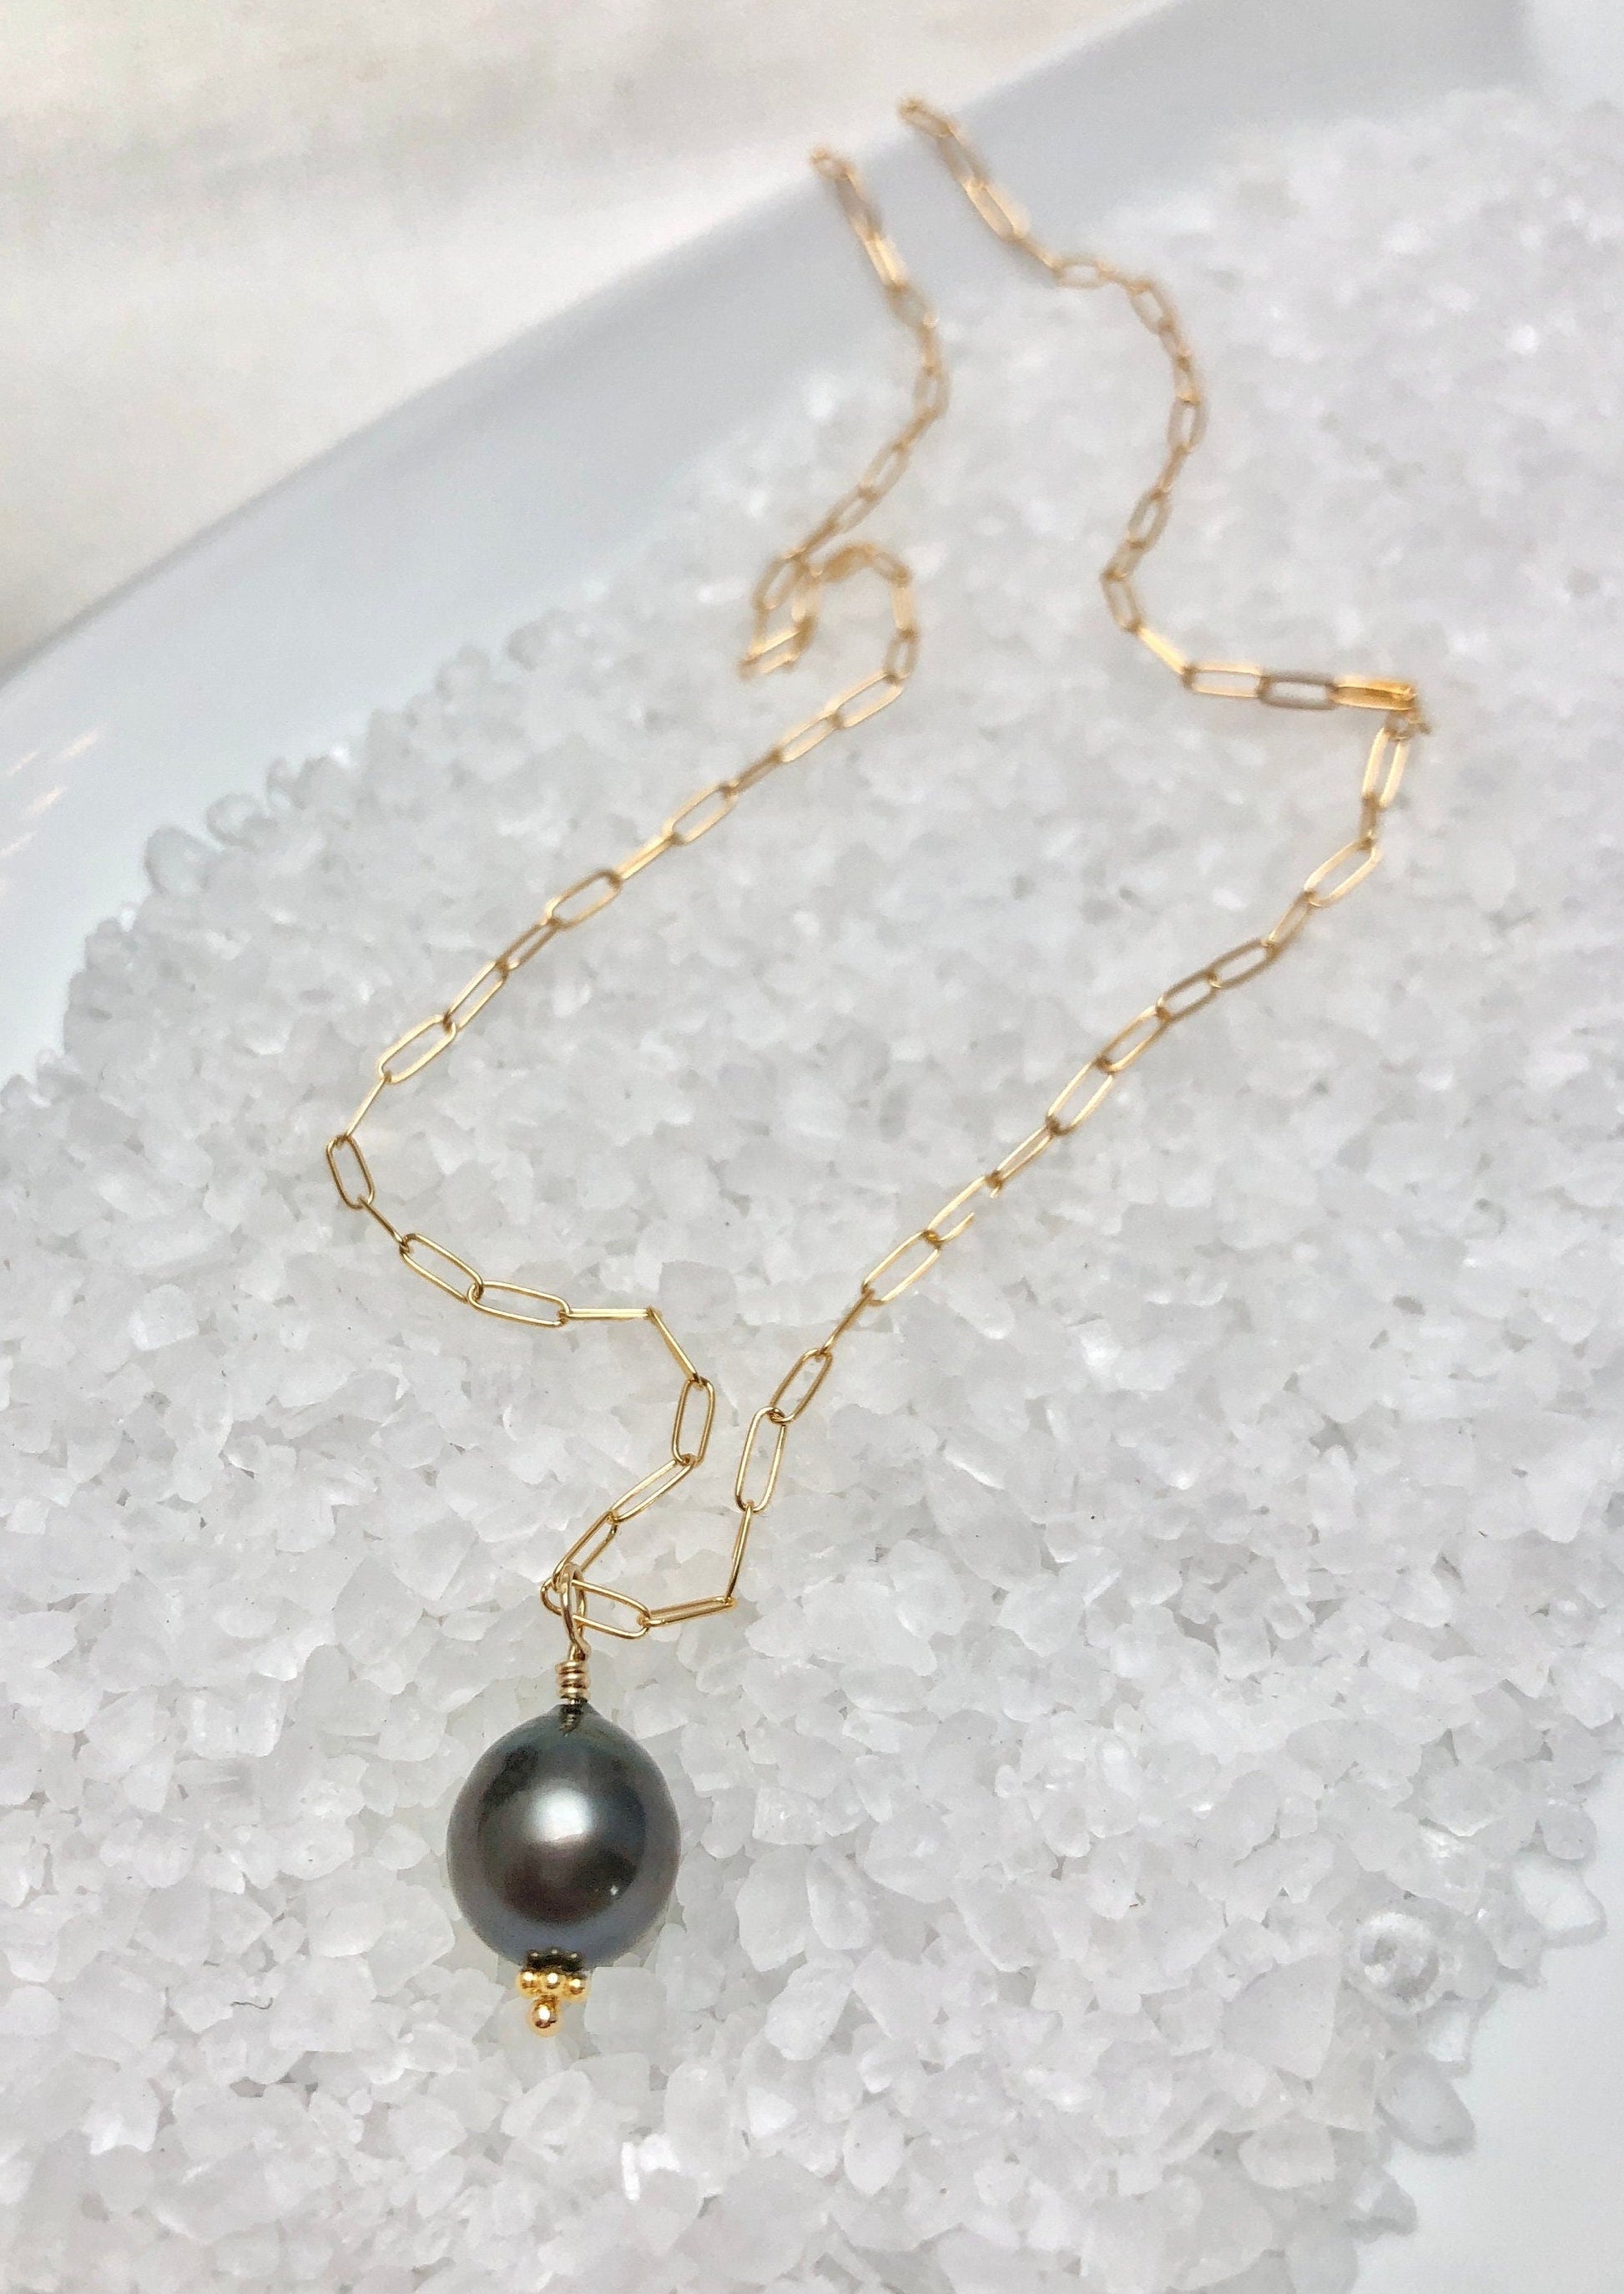 Tahitian Pearl Necklace in Gold with Darker Pearl